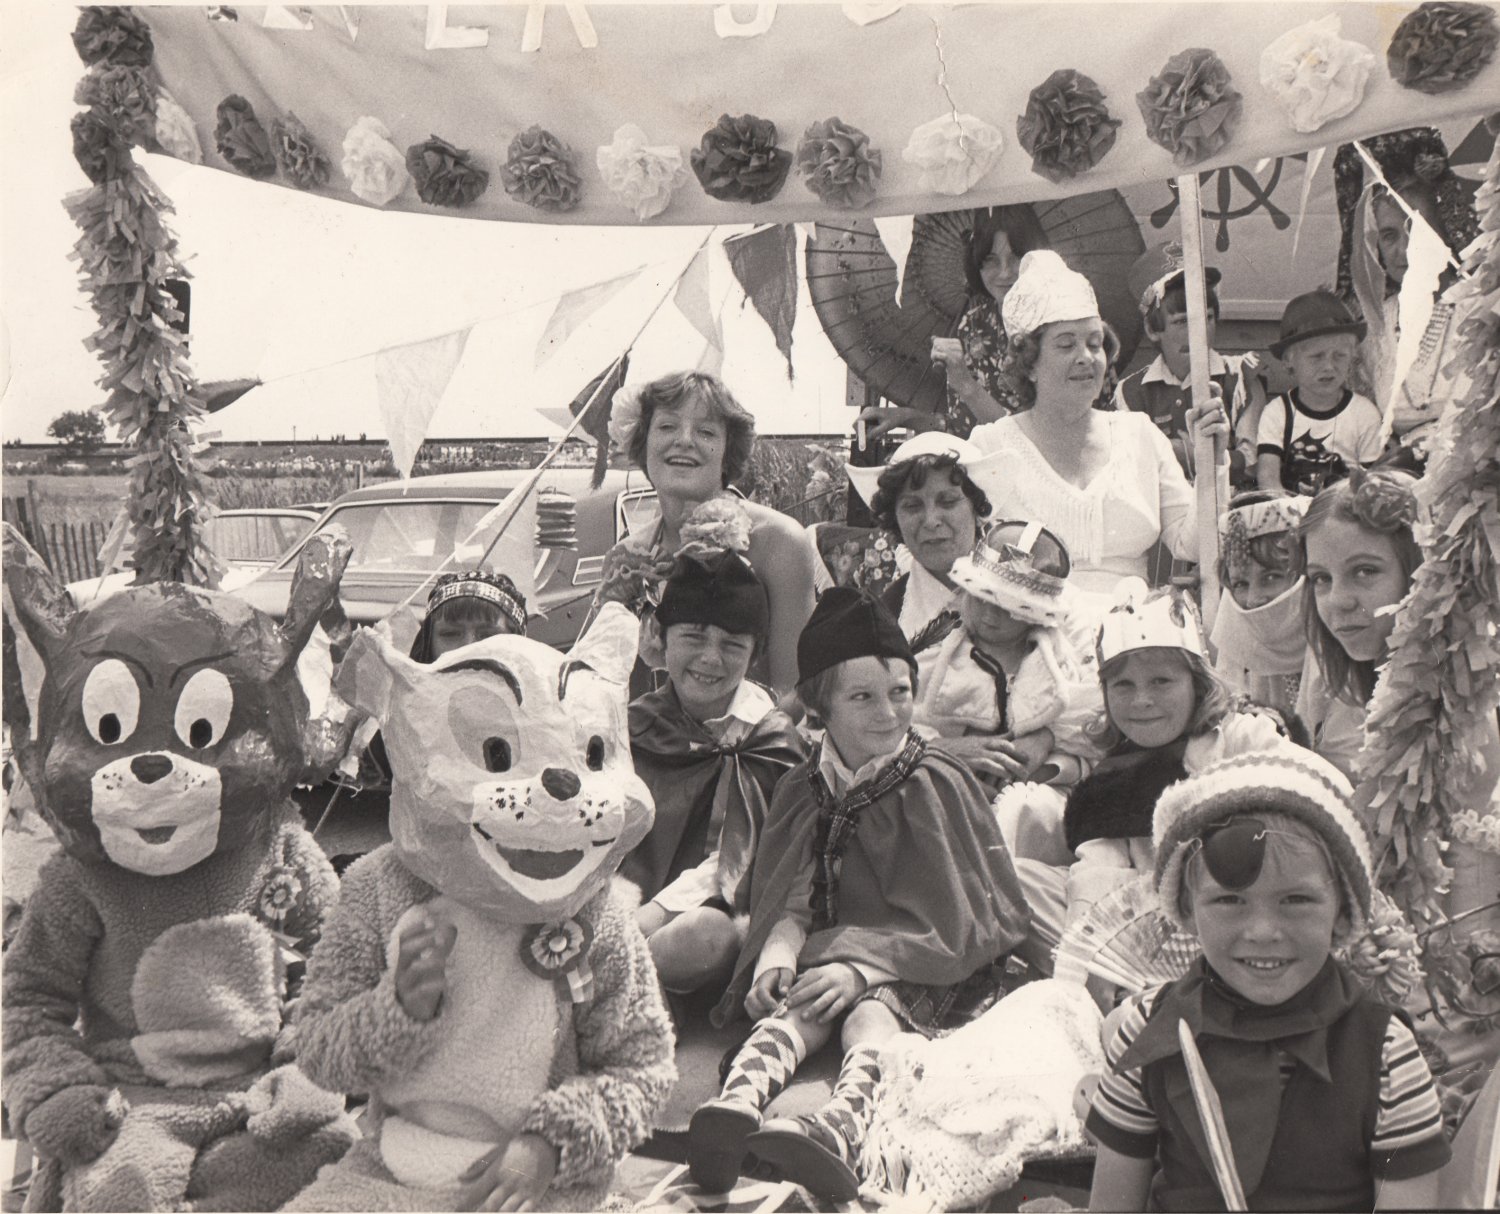 Carnival 1979 | 1970s, Joyce Greenwood's Collection | CanveyIsland.org